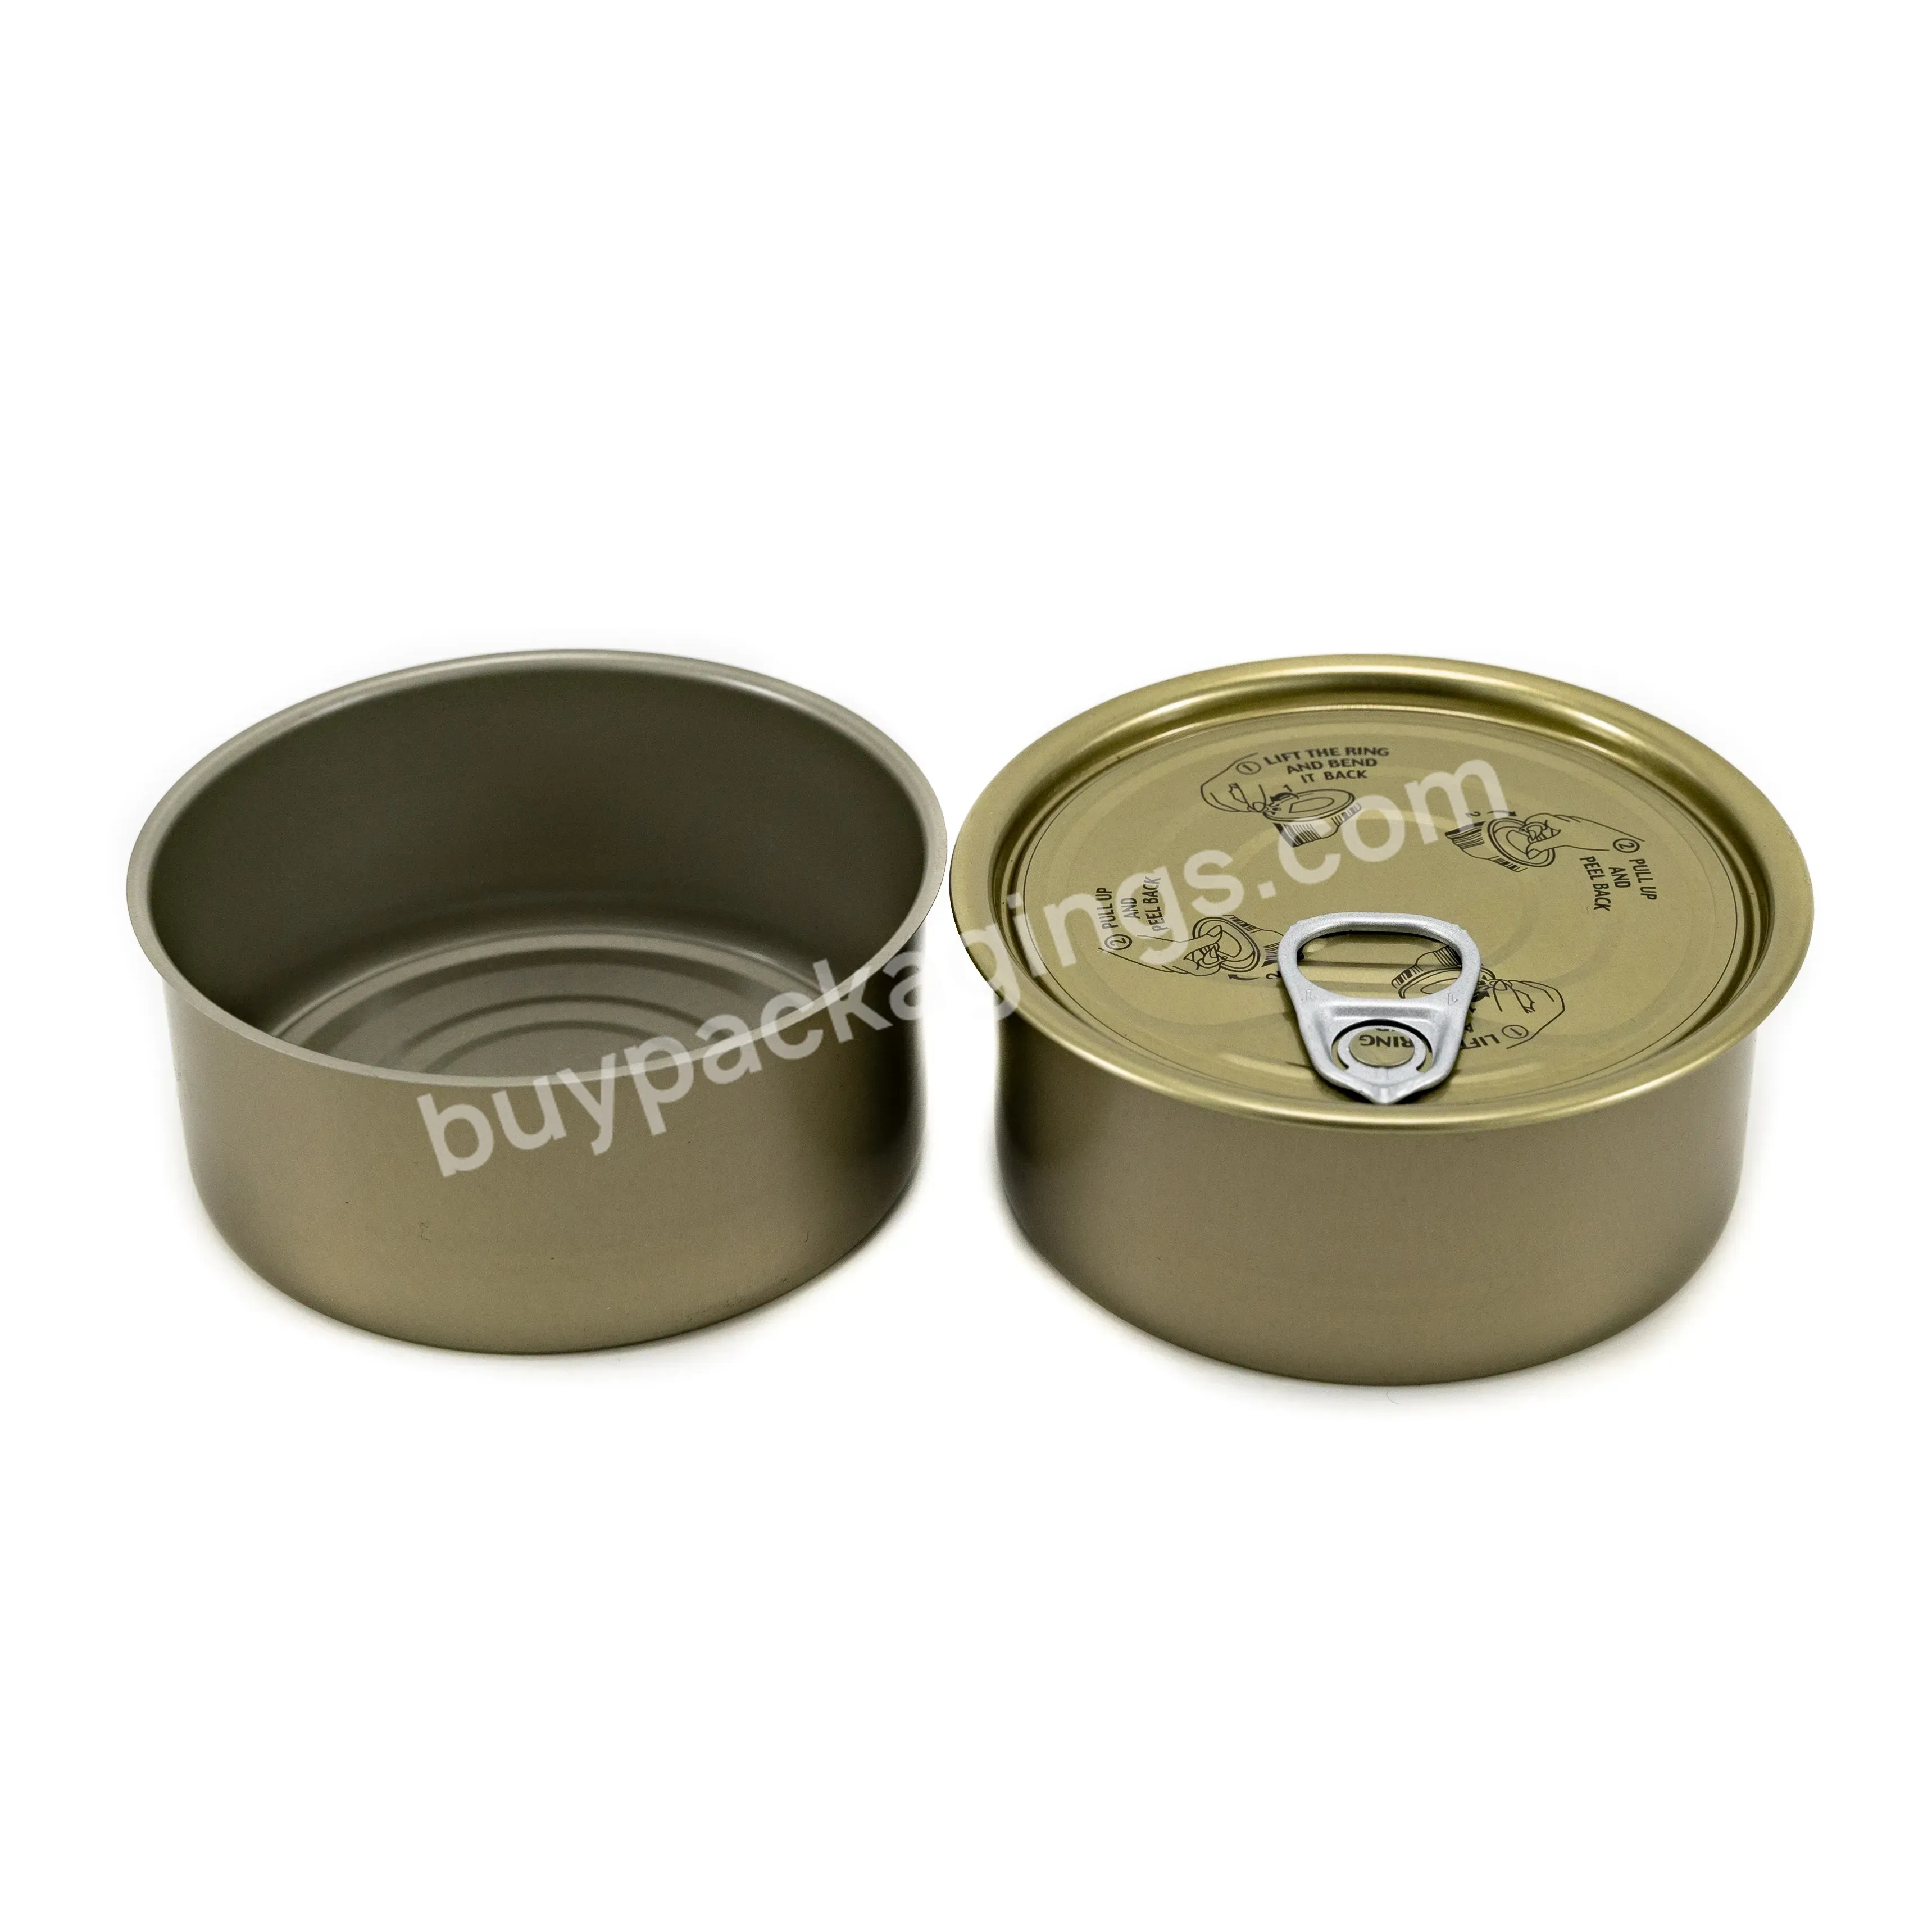 Tinplate Metal Container Empty 85g 170g Tin Cans Wholesale Price With #211 #307 Eoe For Oil Tuna Pet Food Canning - Buy Empty 180ml 250ml 300ml Aluminum Cans Tin Cans Wholesale With Ring-pull Lids For Instant Soup Ice Cream Food Canning,Empty 85g 100